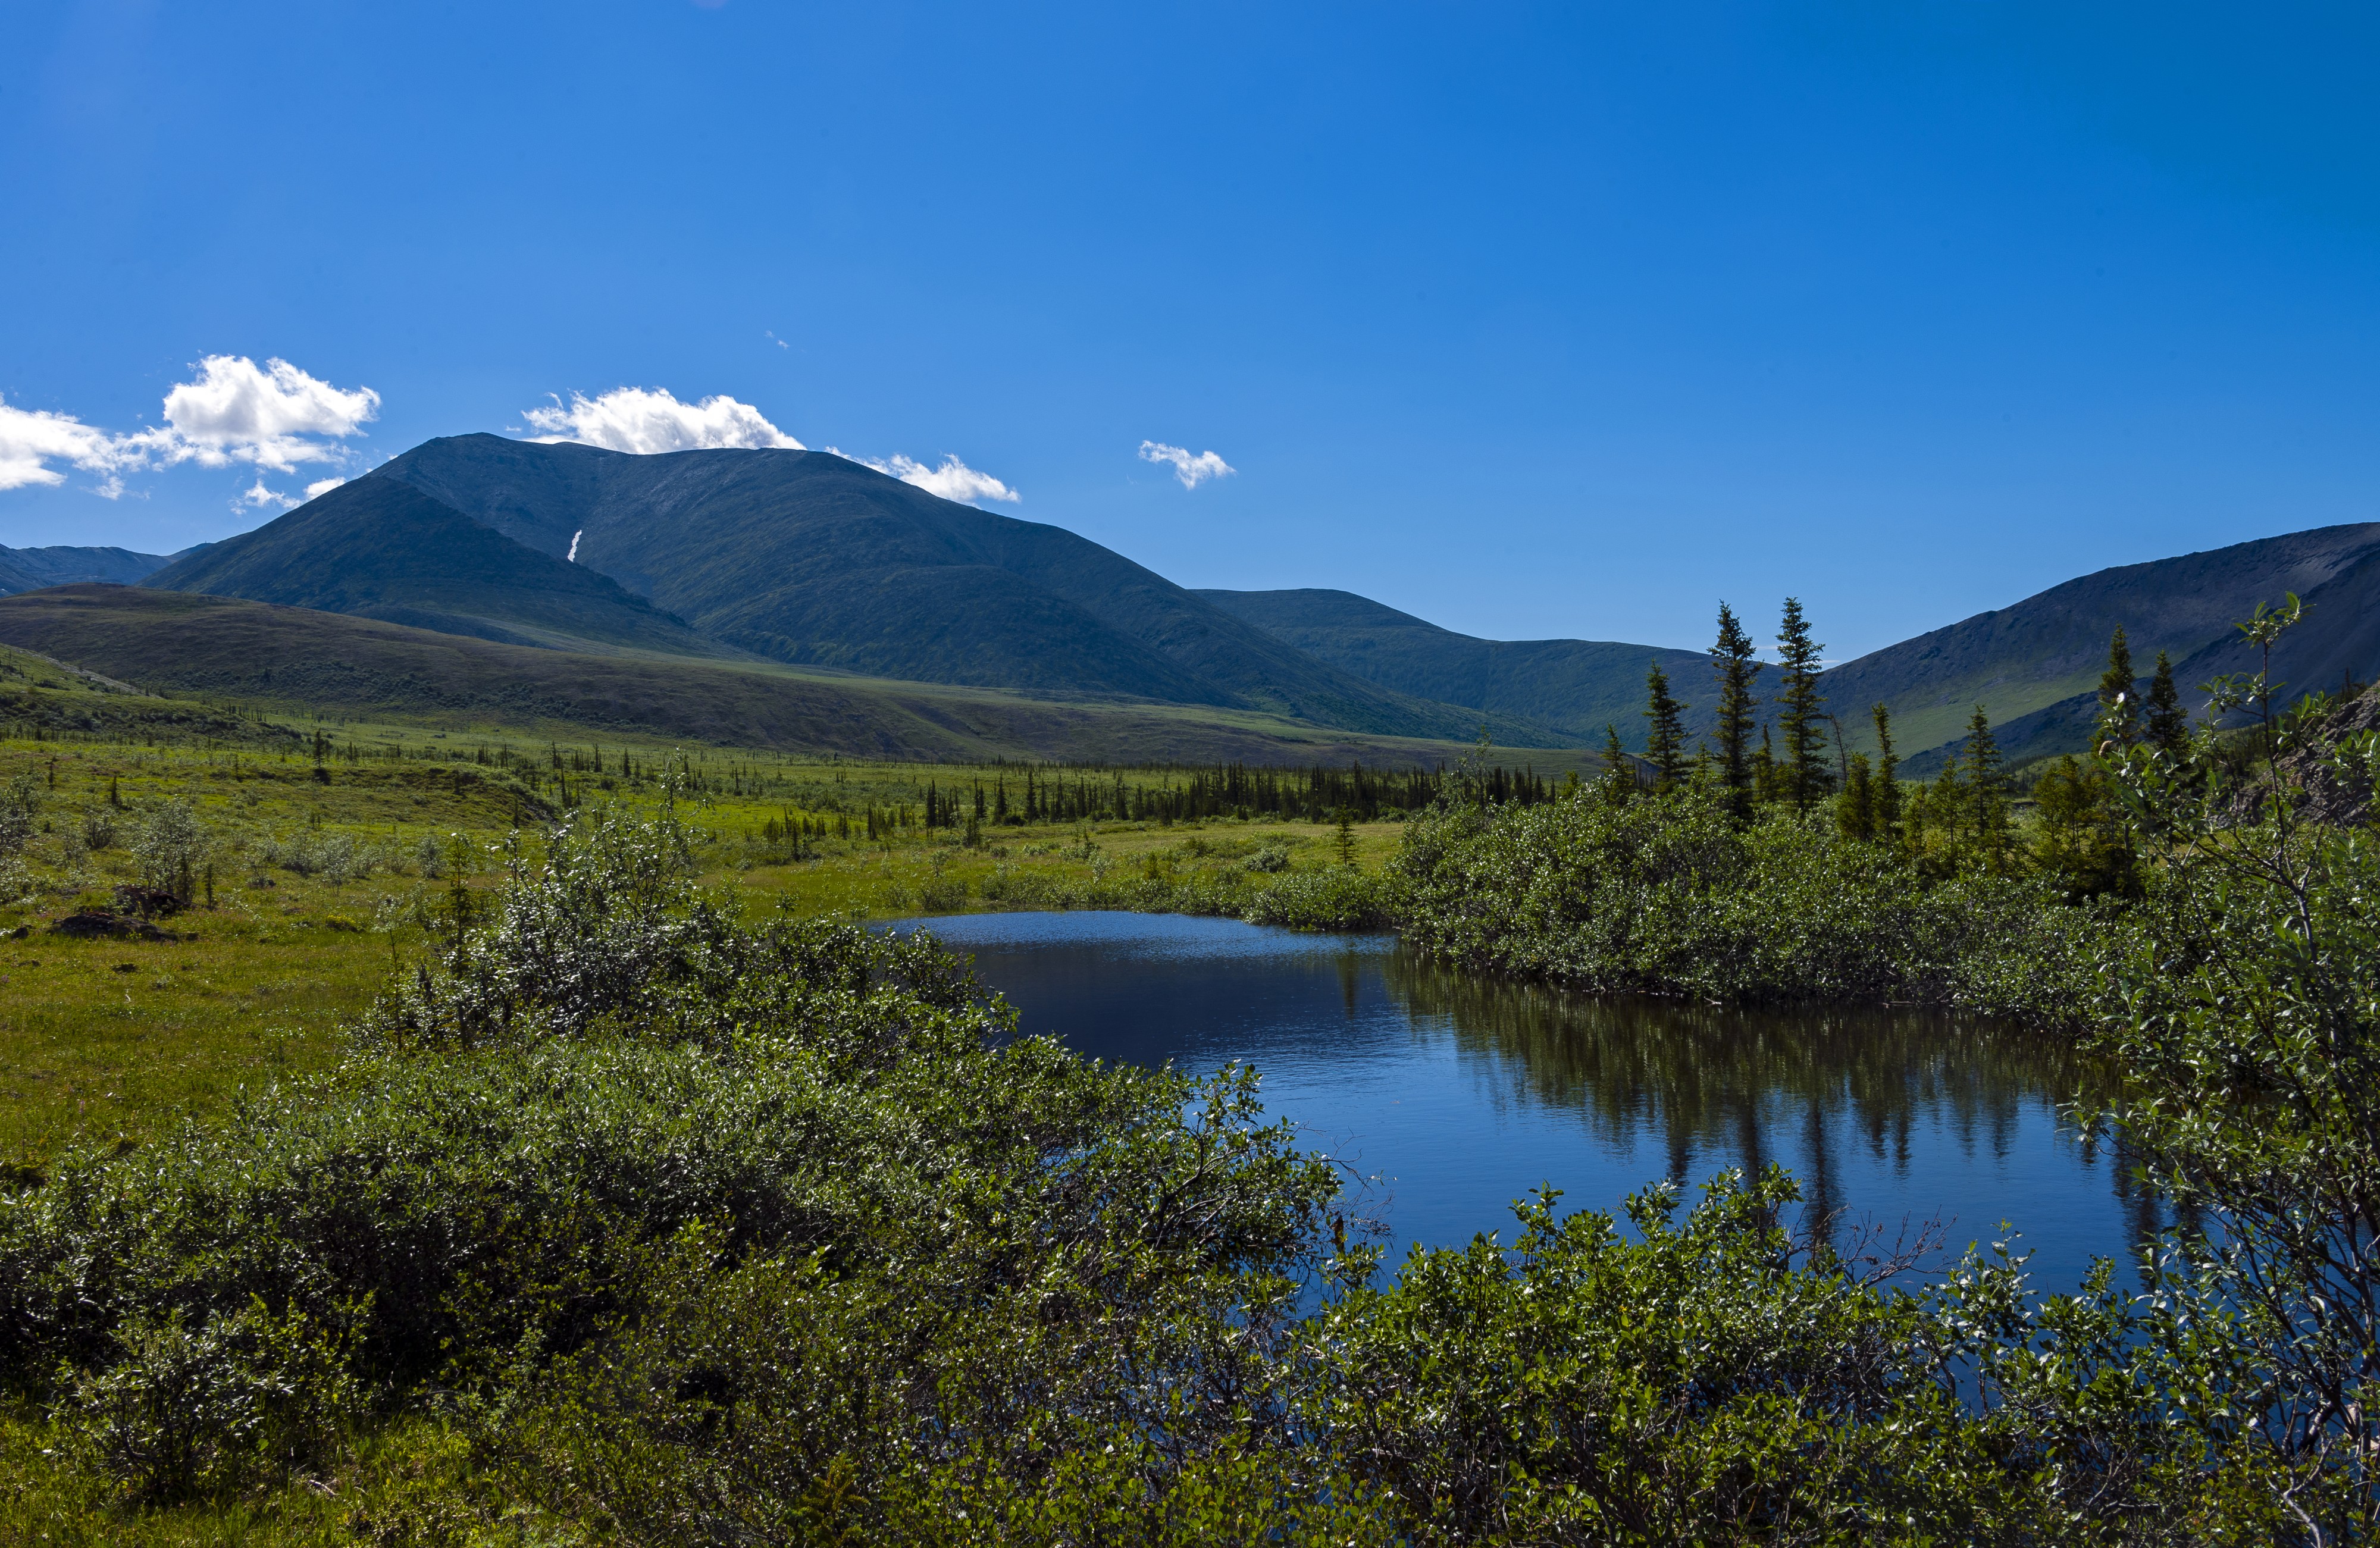 Tundra landscape with mountains and small pond, Ivvavik National Park, YT